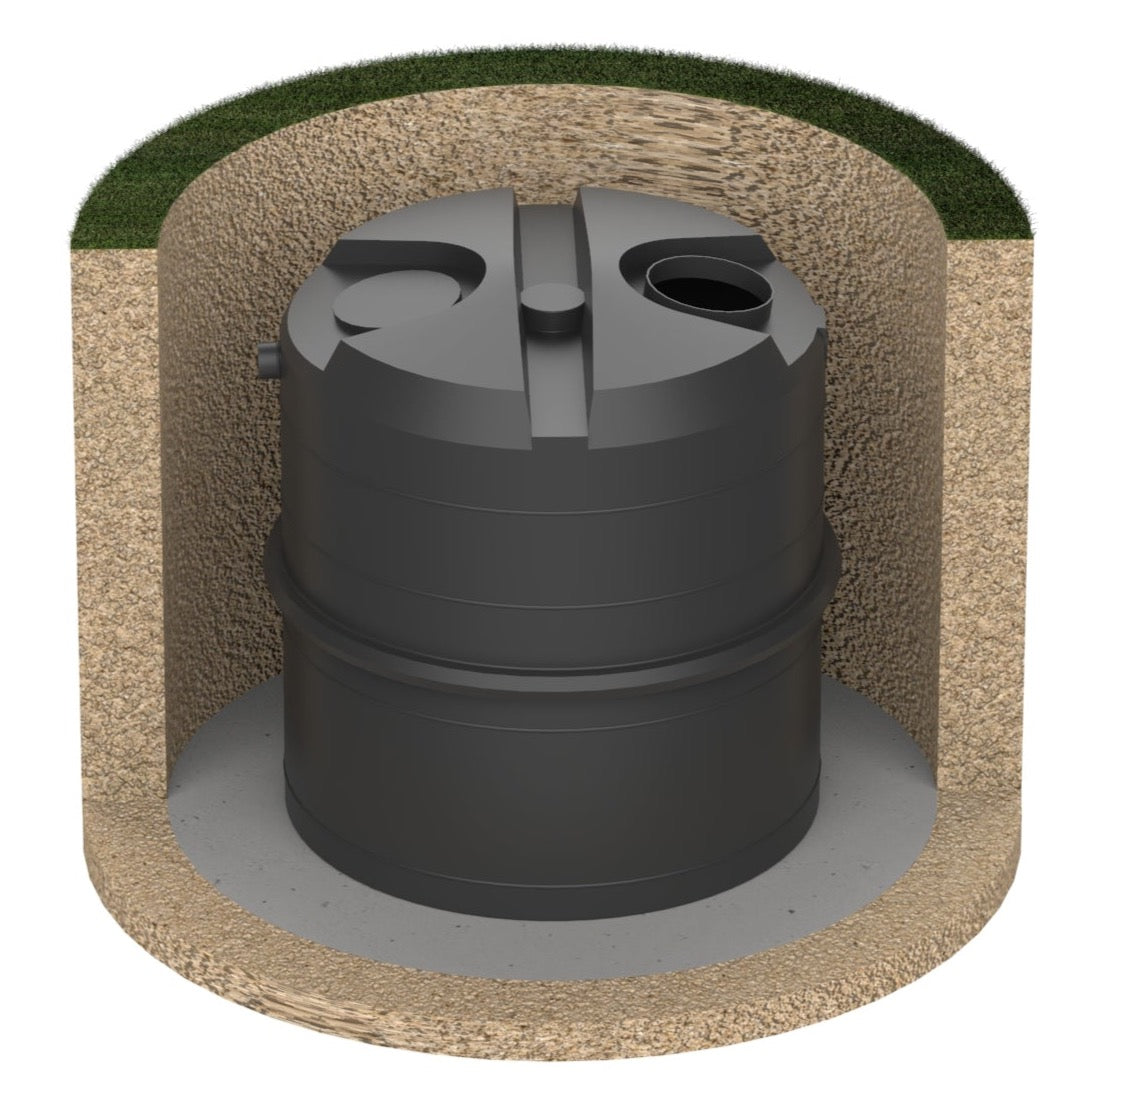 Septic Tanks For Sale, Plastic Septic Tanks for Sale